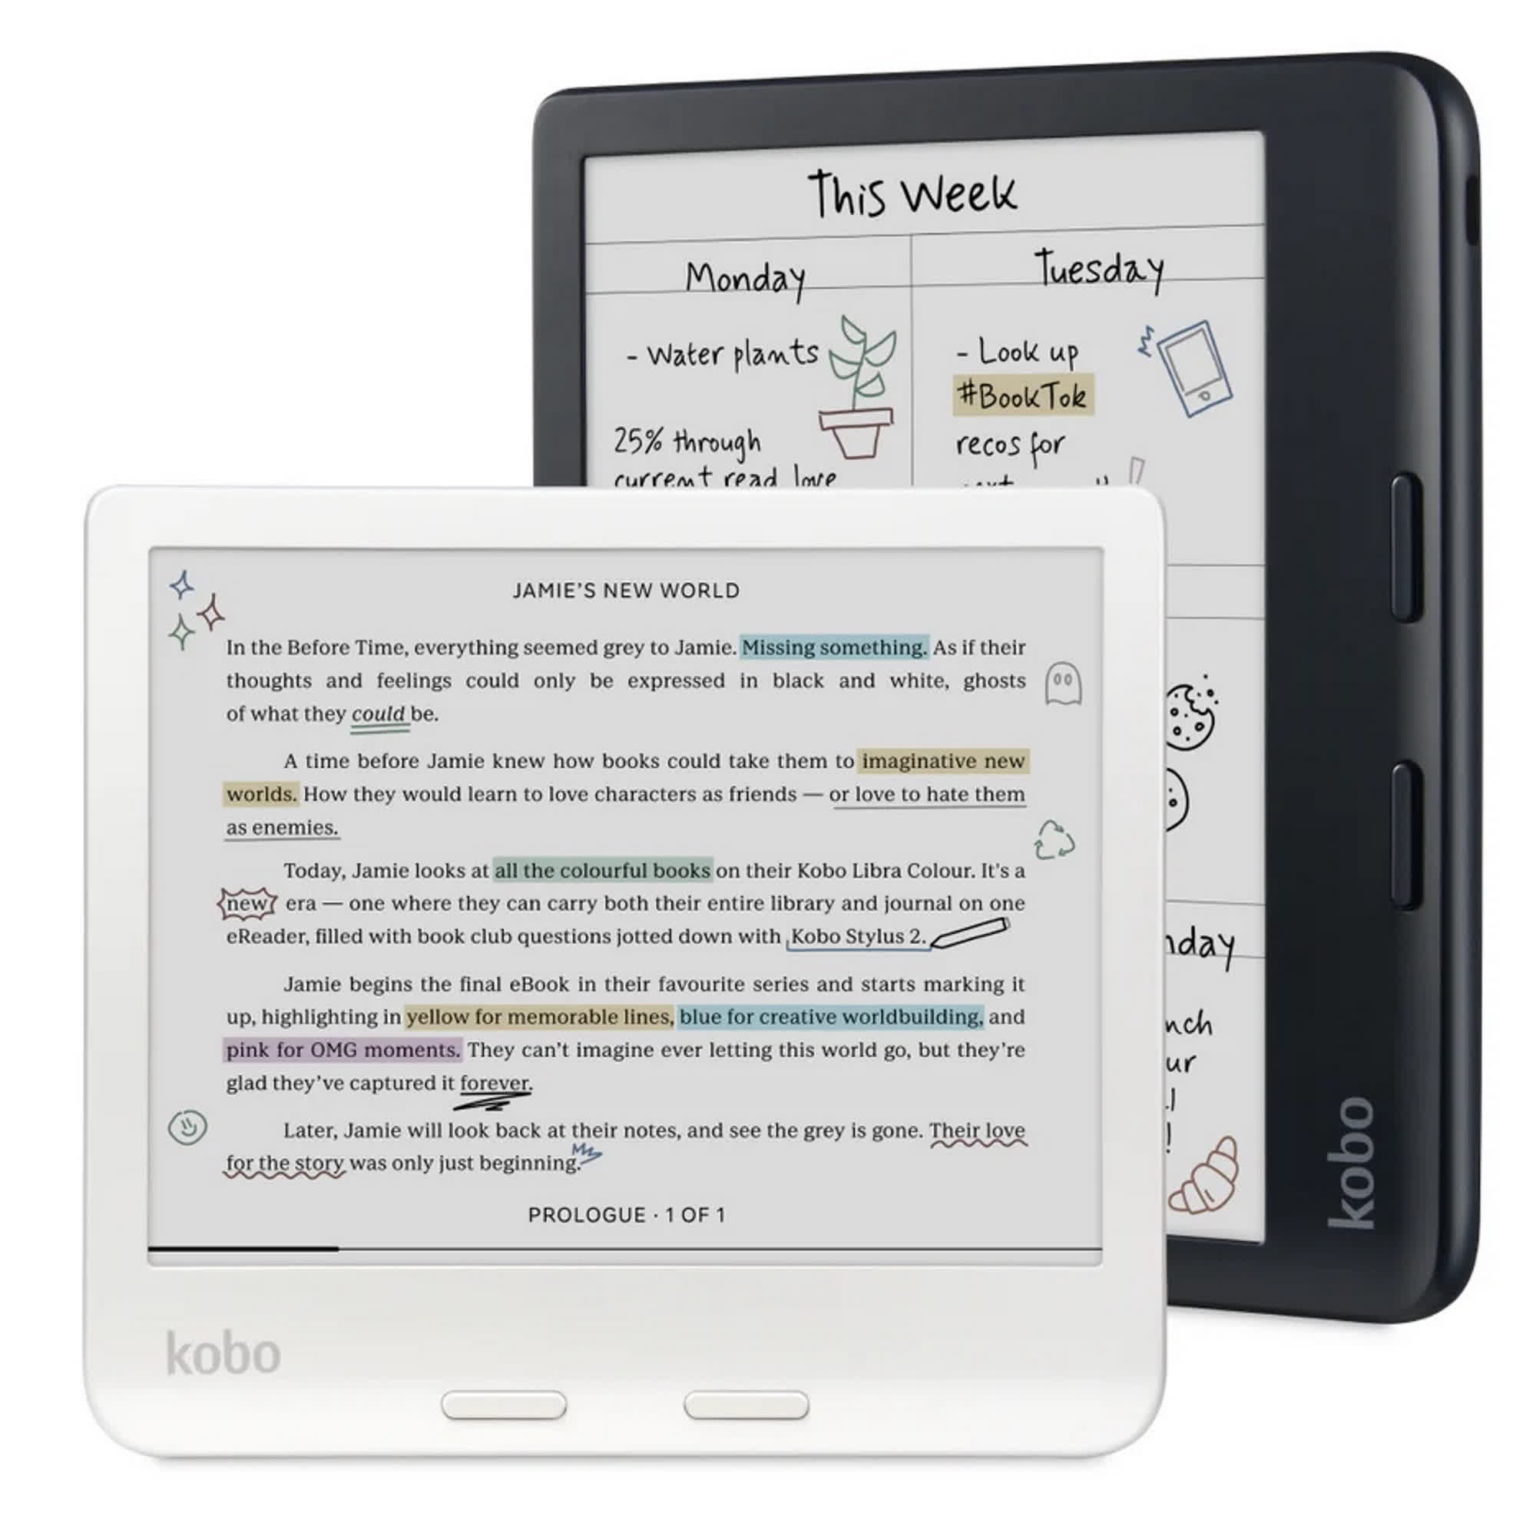 Kobo brings its first color e-reader to the market, starting at $150